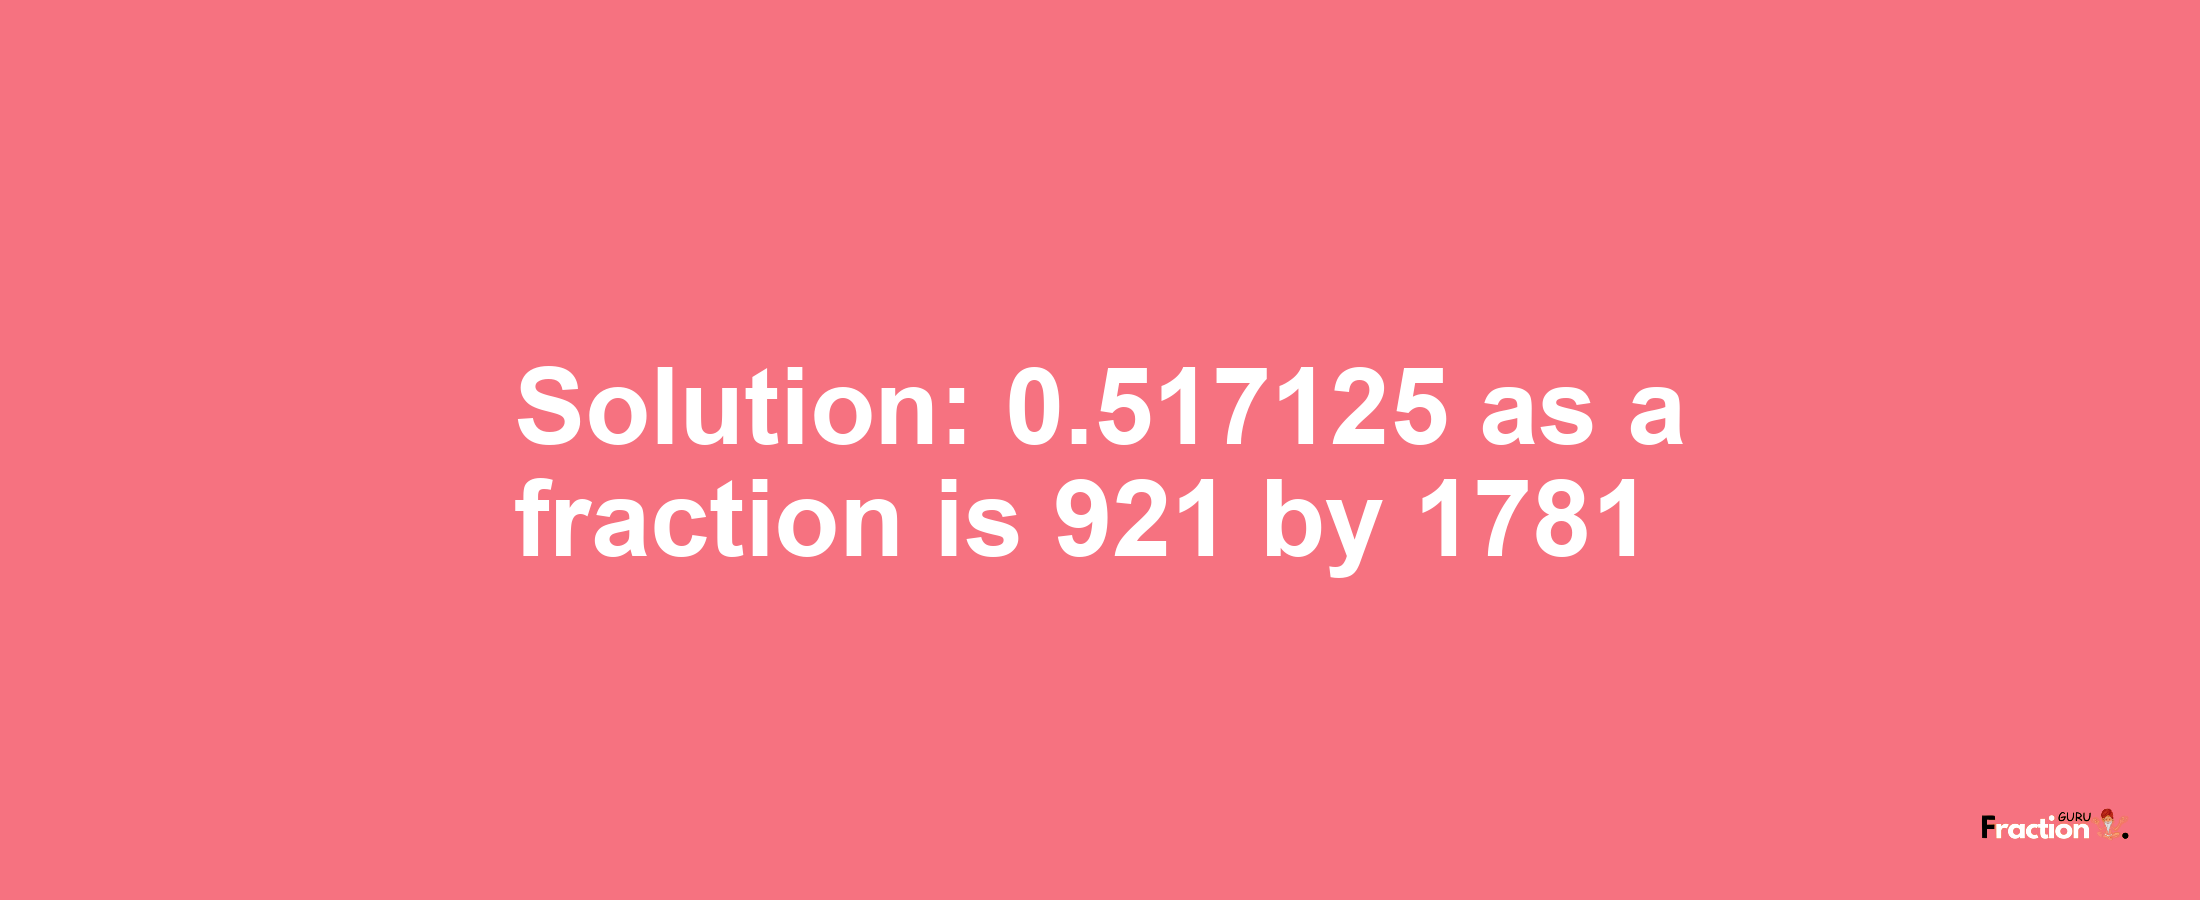 Solution:0.517125 as a fraction is 921/1781